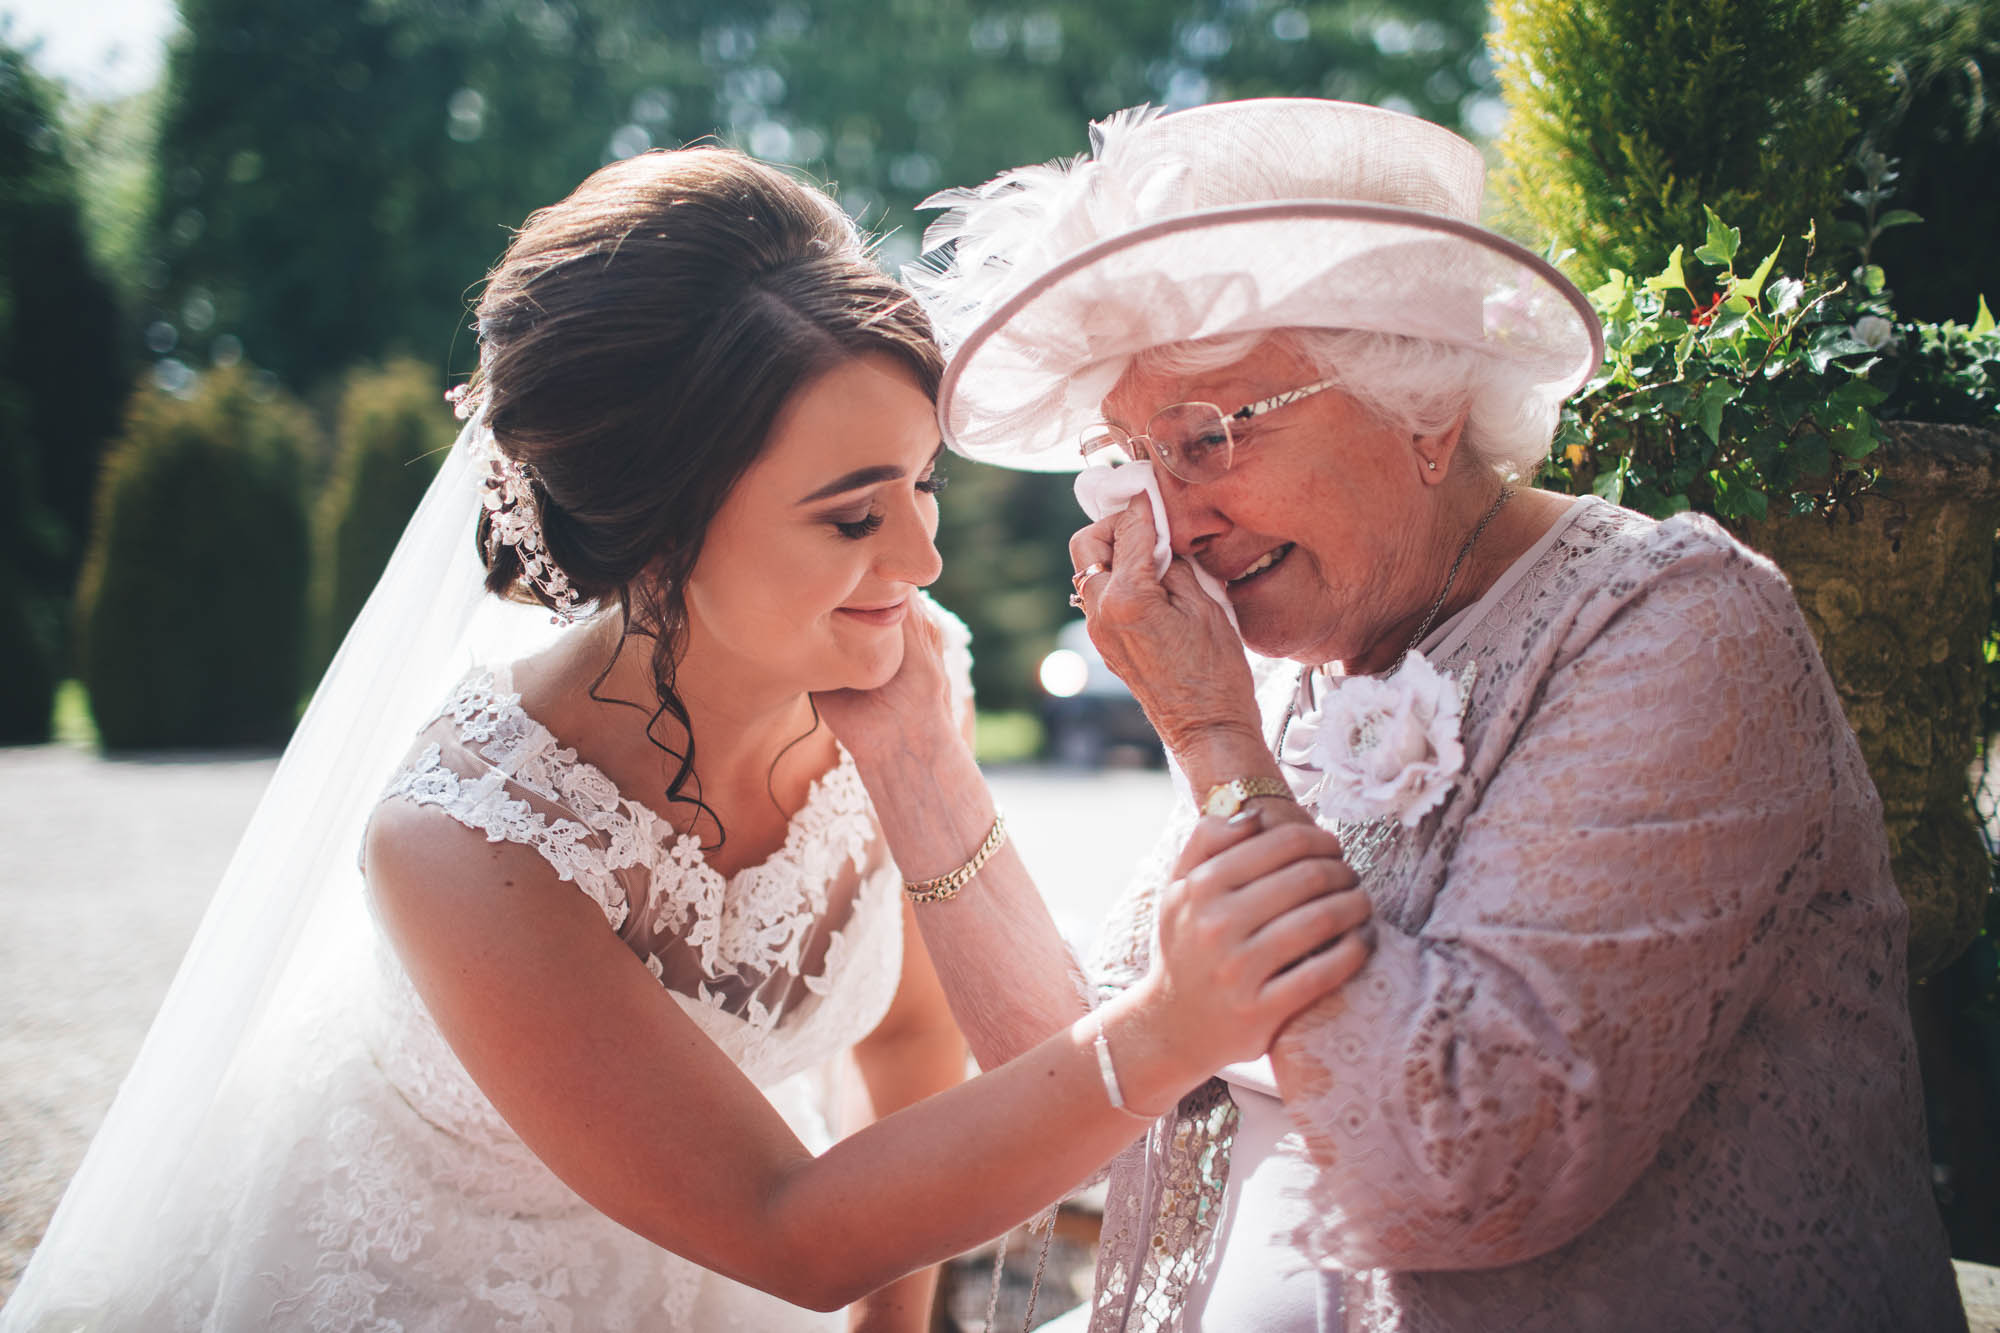 Bride and Grandmother share an emotional moment on Wedding day as Grandmother wipes tears away